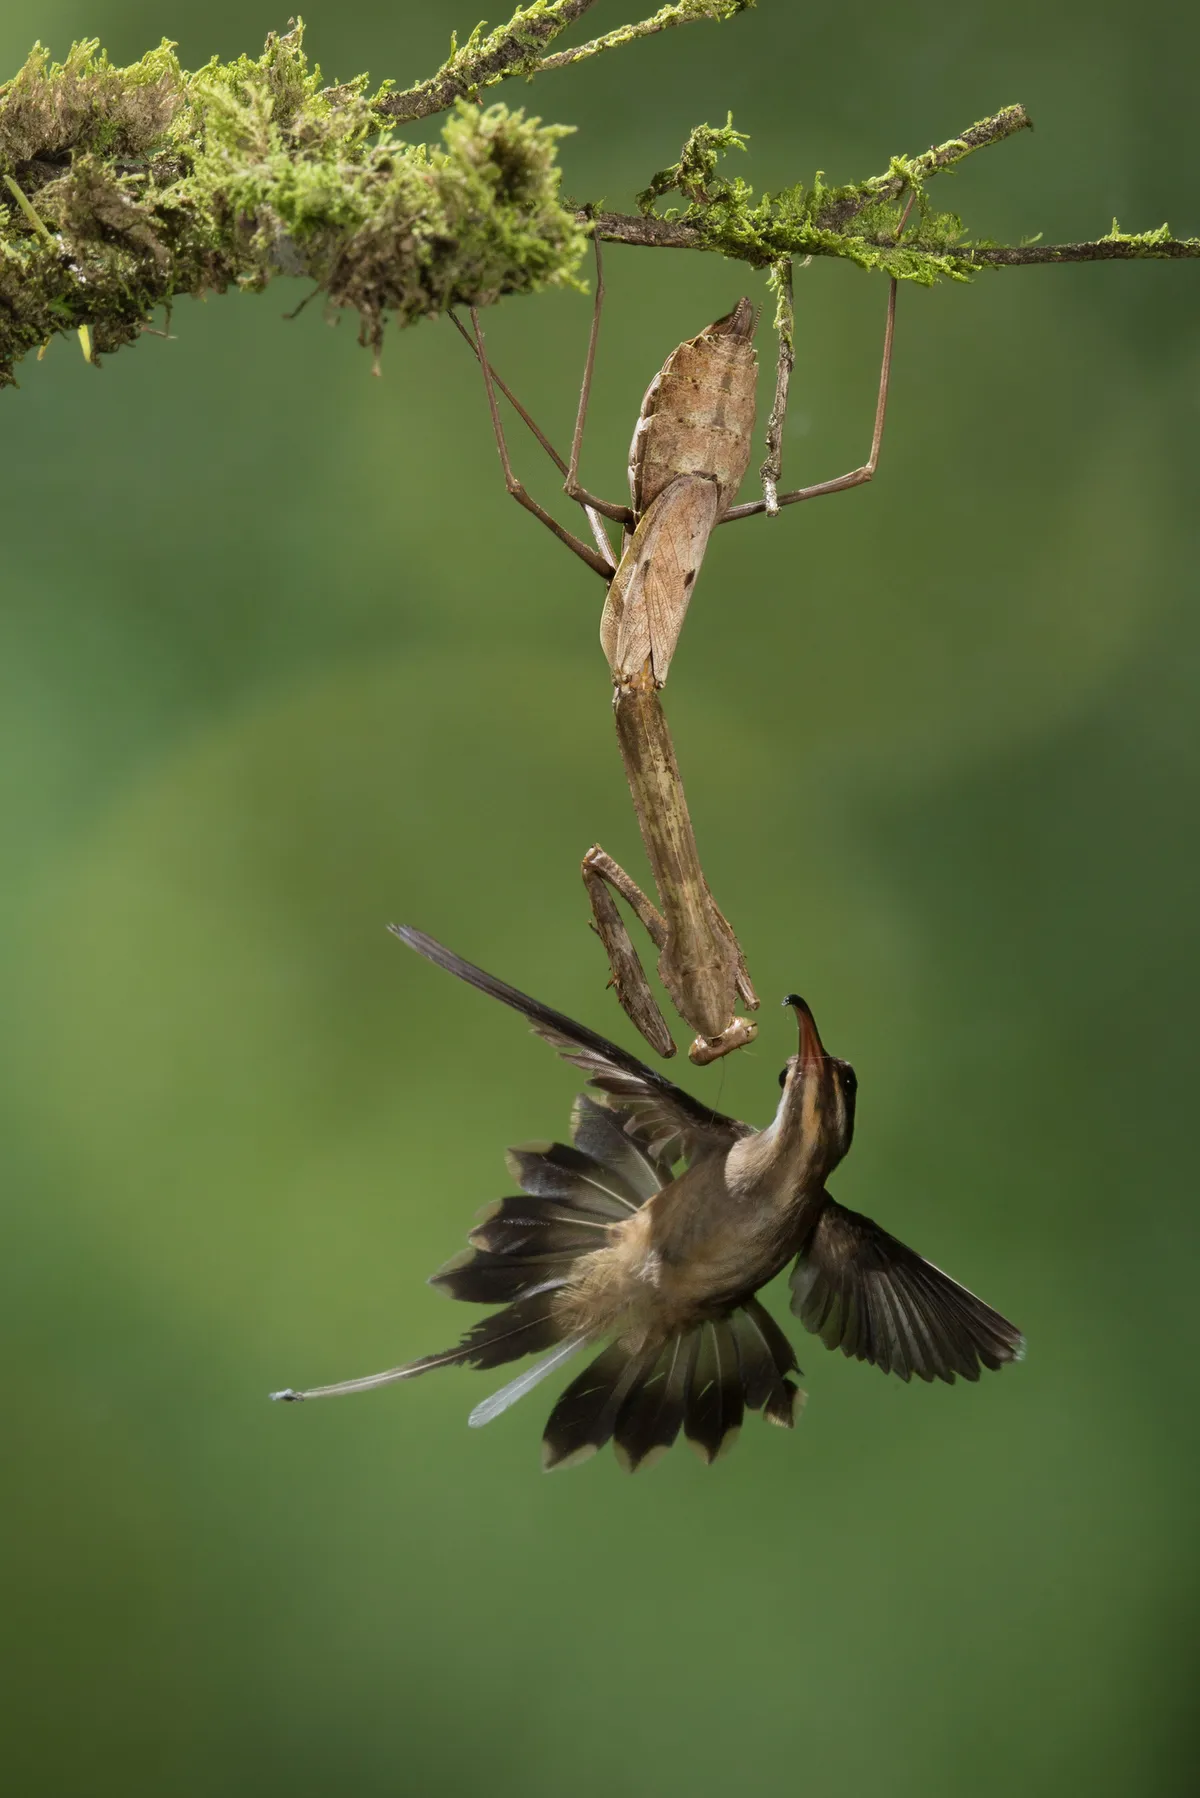 Long-billed hermit hummingbird pushing a mantis out of its territory